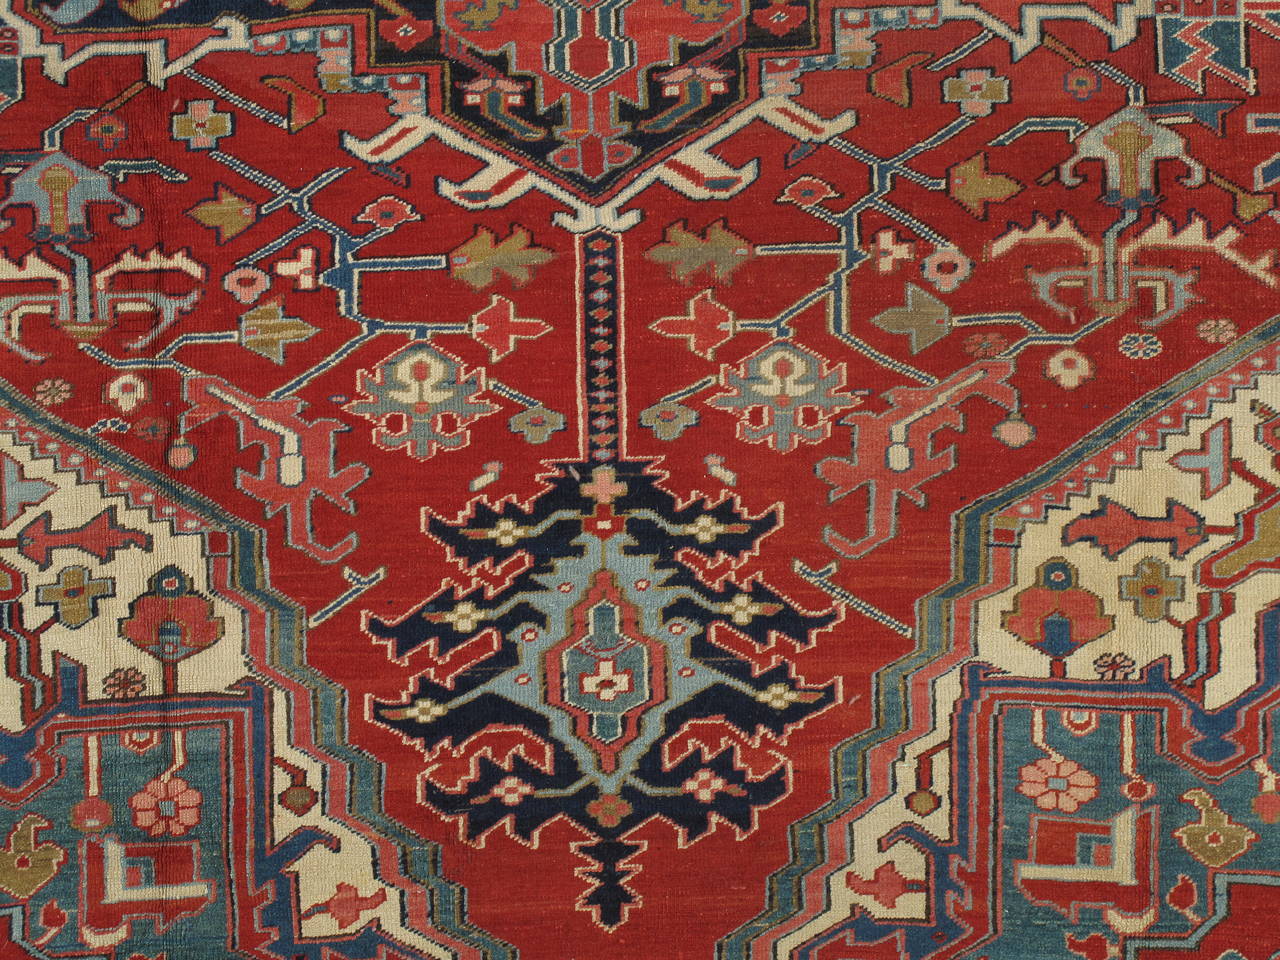 Antique Persian Heriz Carpet, Handmade Wool Oriental Rug, Red and Navy Light Blue In Excellent Condition For Sale In Port Washington, NY